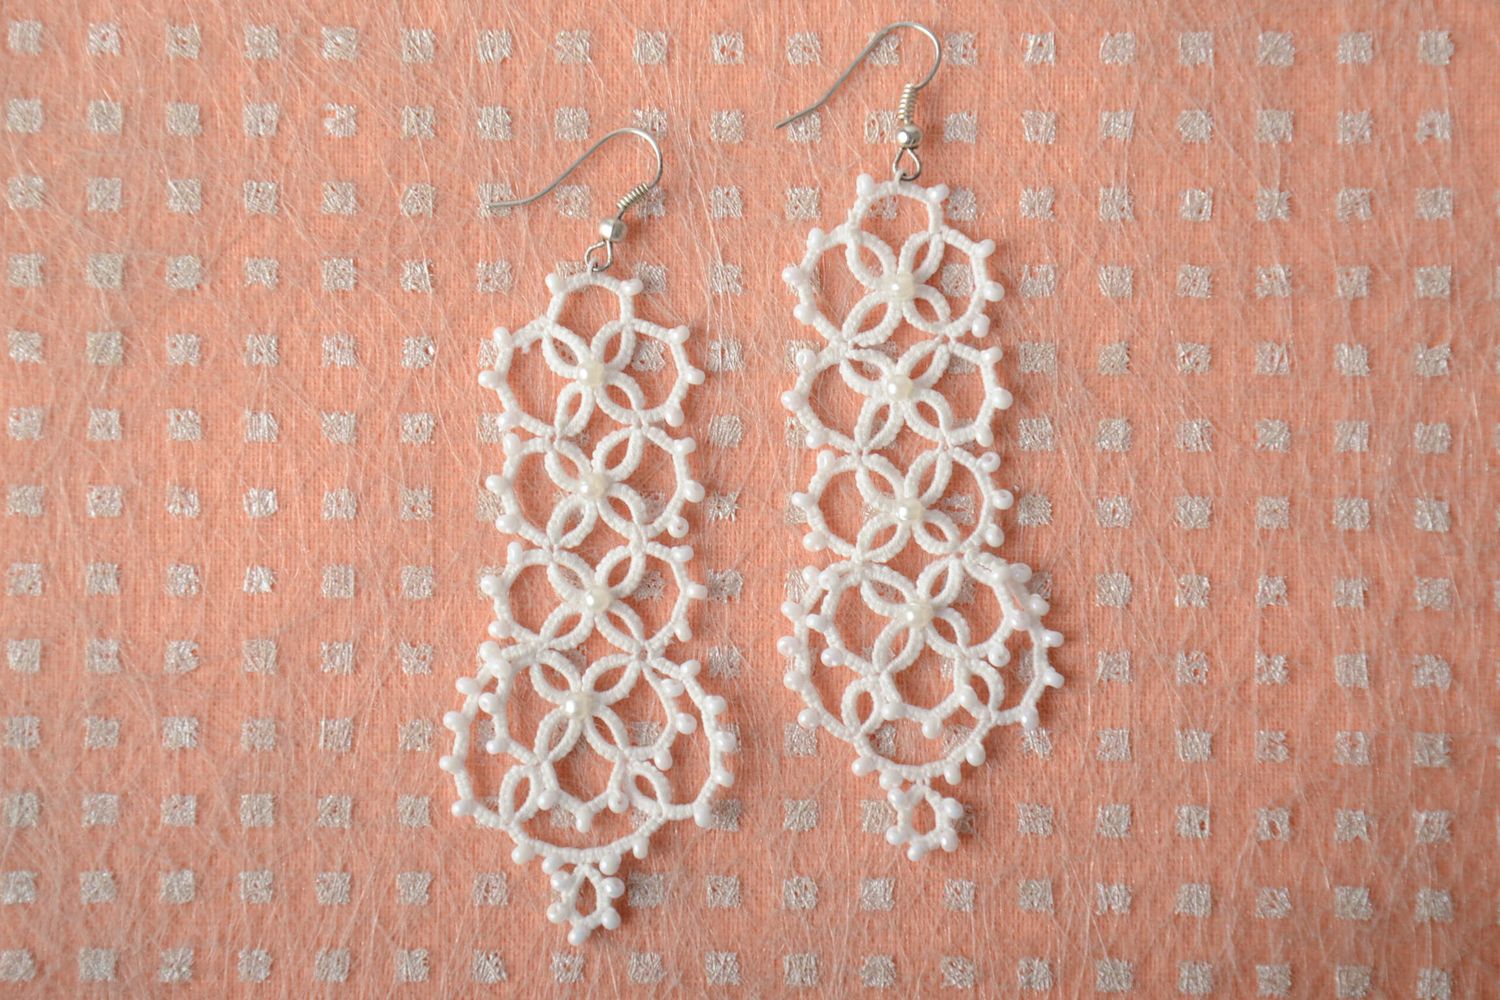 Woven earrings with beads made using tatting technique photo 1